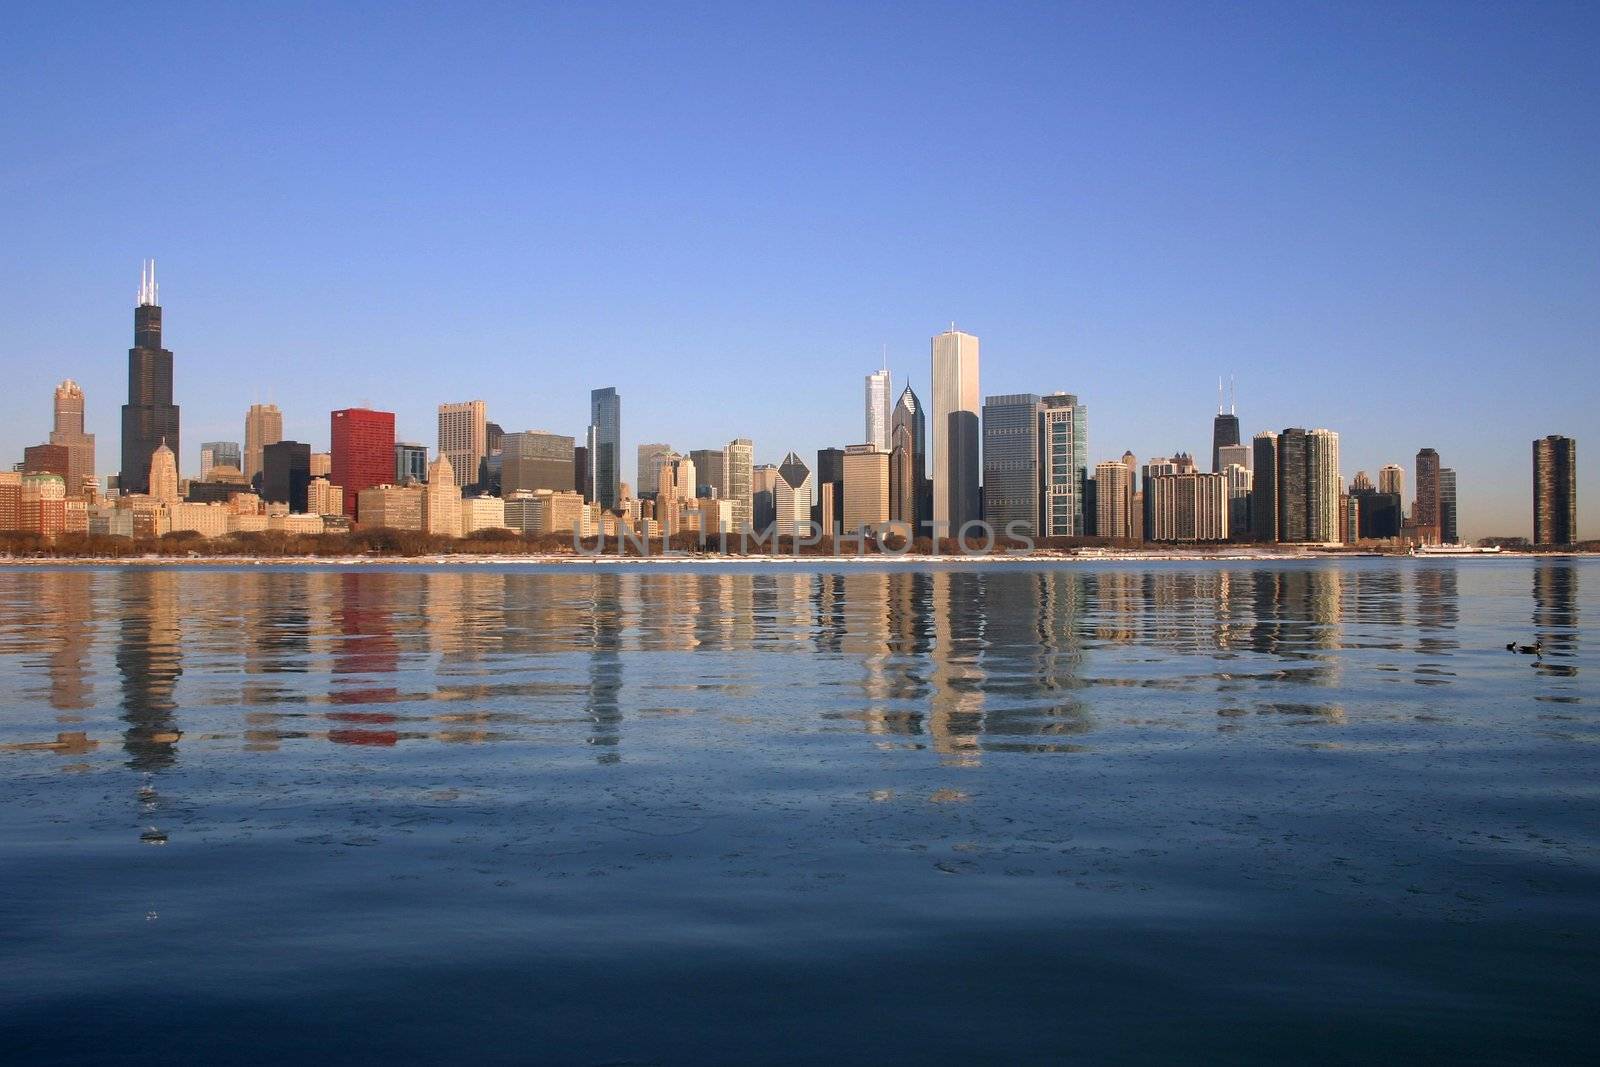 The Chicago skyline at by day, photographed from the Planetarium across the frozen surface of Lake Michigan.